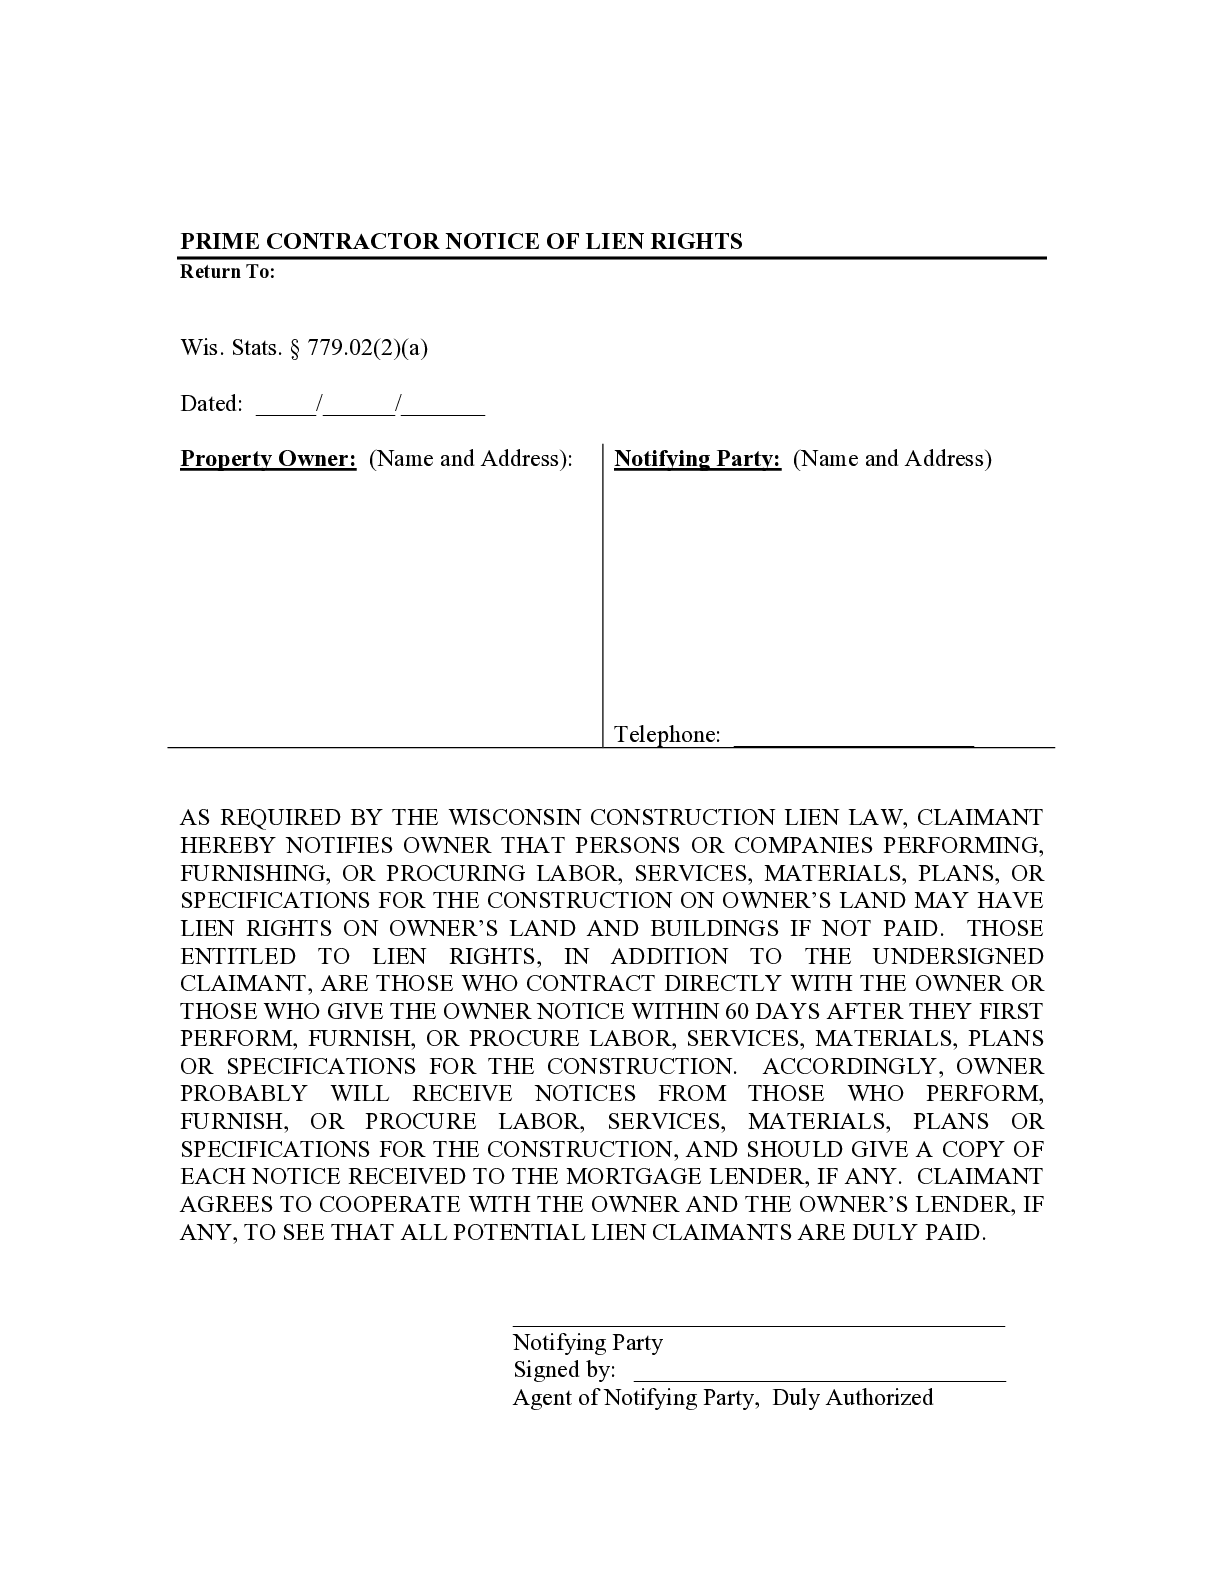 Wisconsin Notice of Lien Rights by Prime Contractor Form